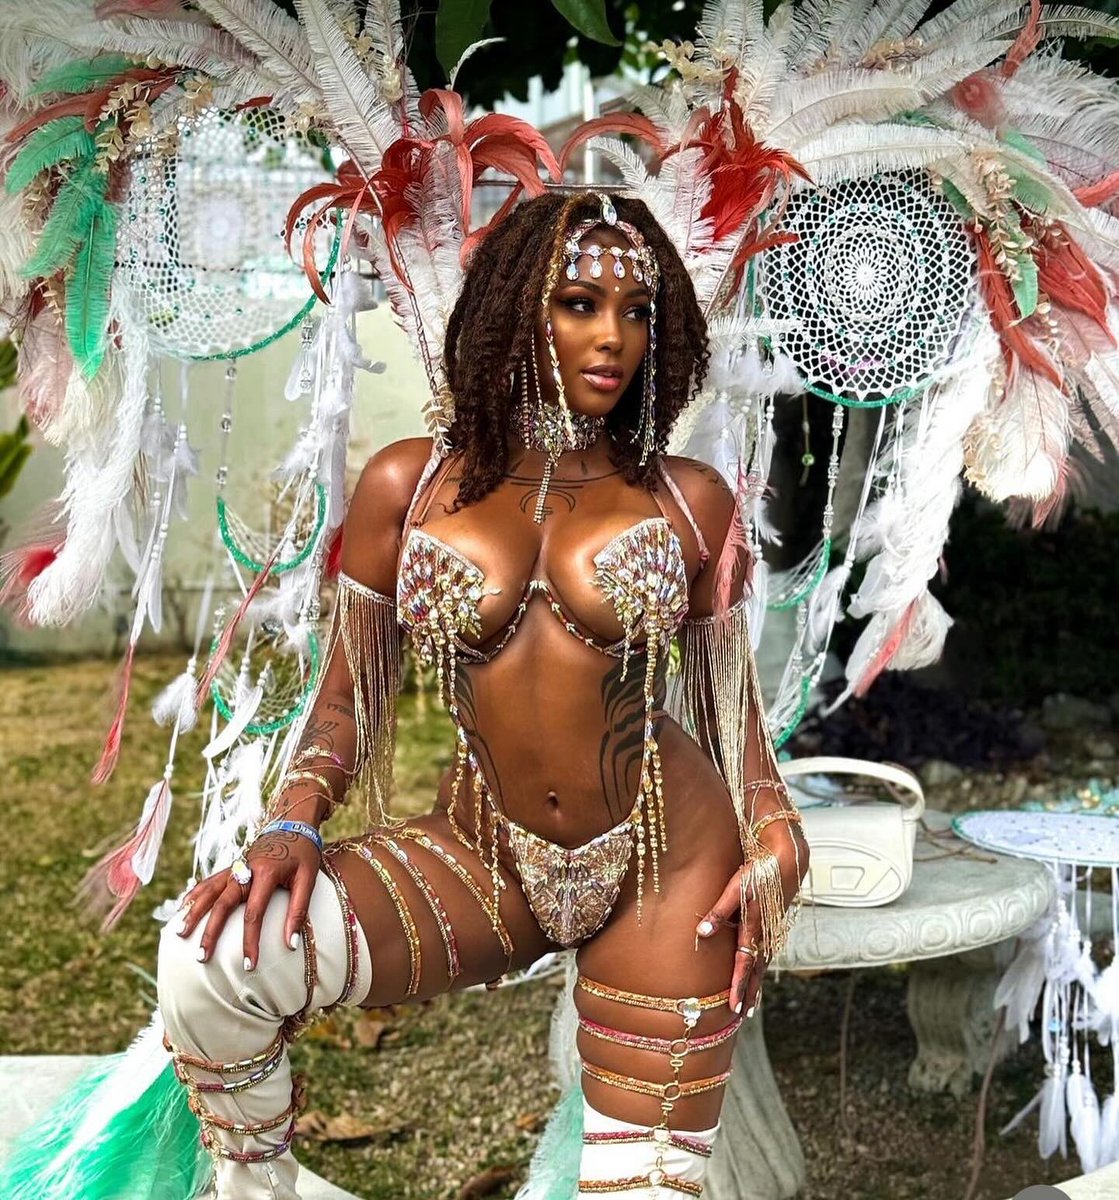 Comment your favorite look from Jamaica Carnival below 👇 

#StayGoldenCosmetics #JamaicaCarnival #GlitterLipKit #CarnivalJamaica #JamaicaCarnival2024 #Soca #Bacchanal